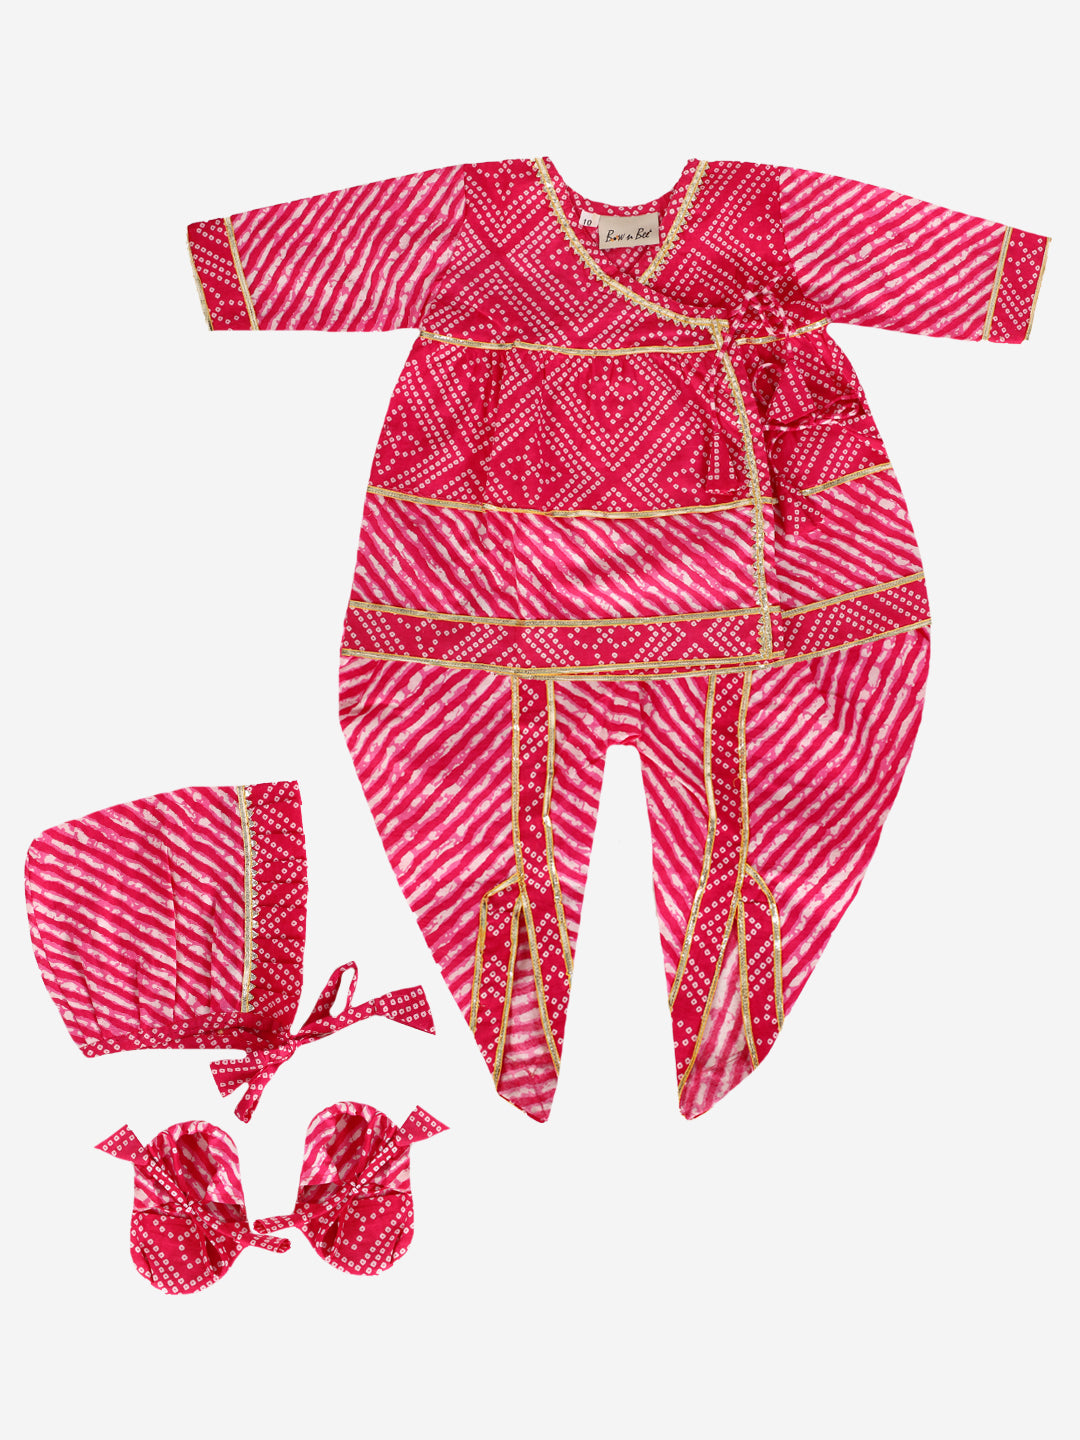 BownBee Pure Cotton Full Sleeve Jamna Set For Girls - Pink